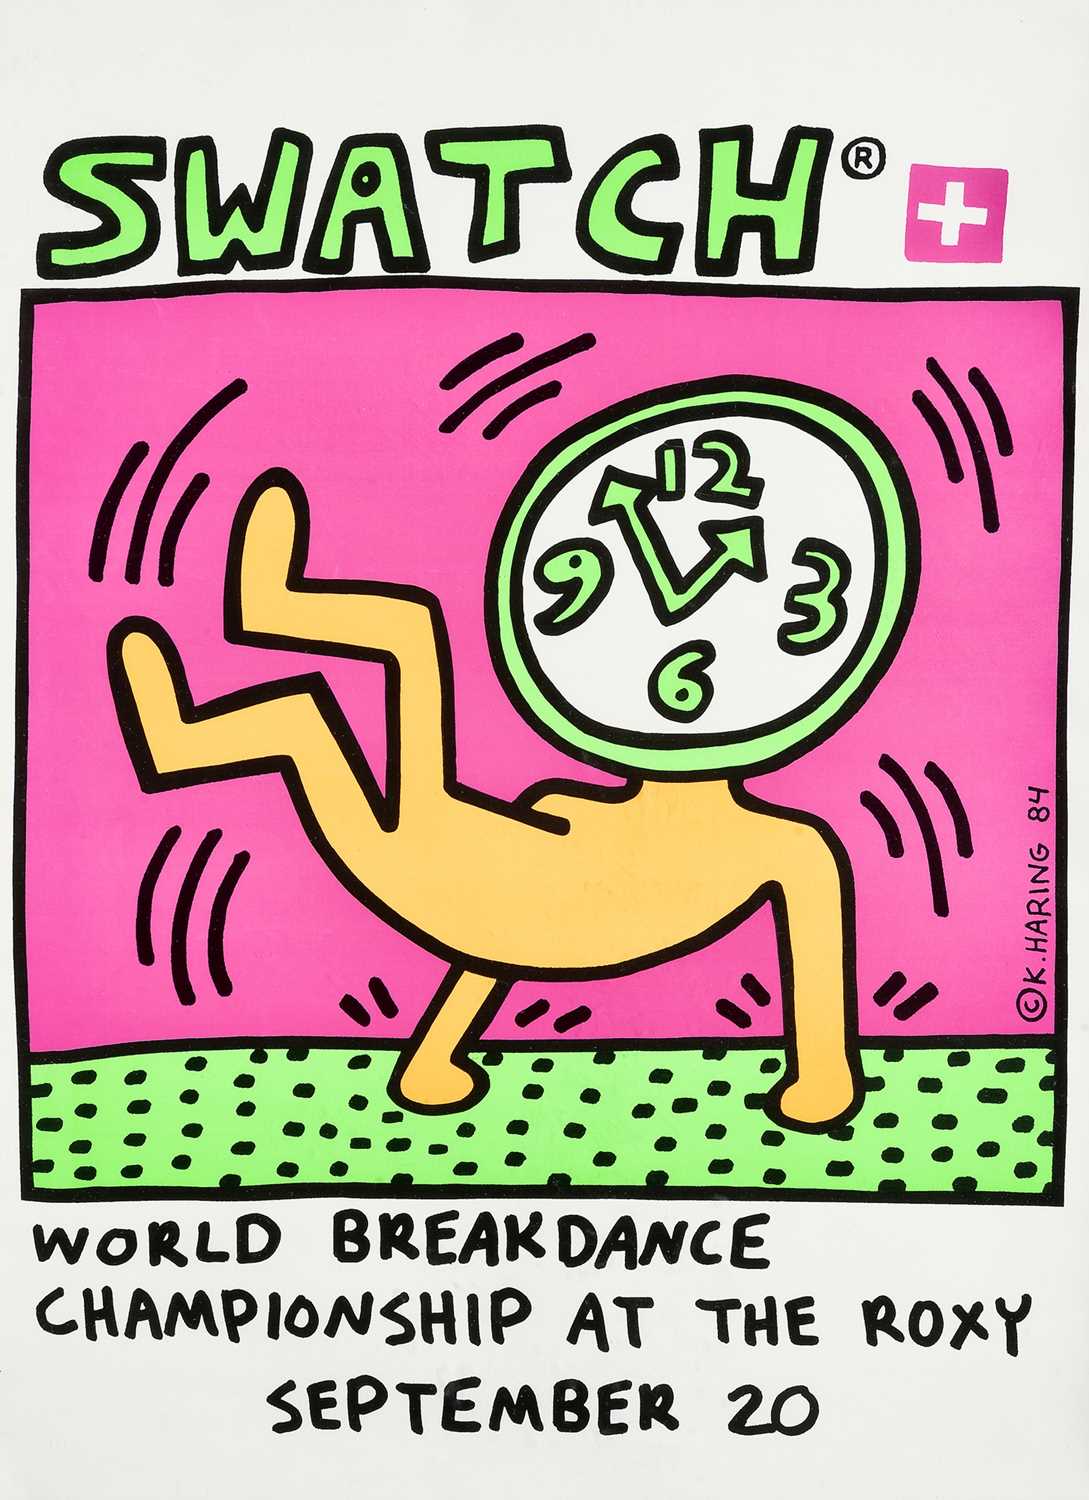 Lot 150 - Keith Haring (American 1958-1990), 'Swatch World Breakdancing Championship At The Roxy', 1984